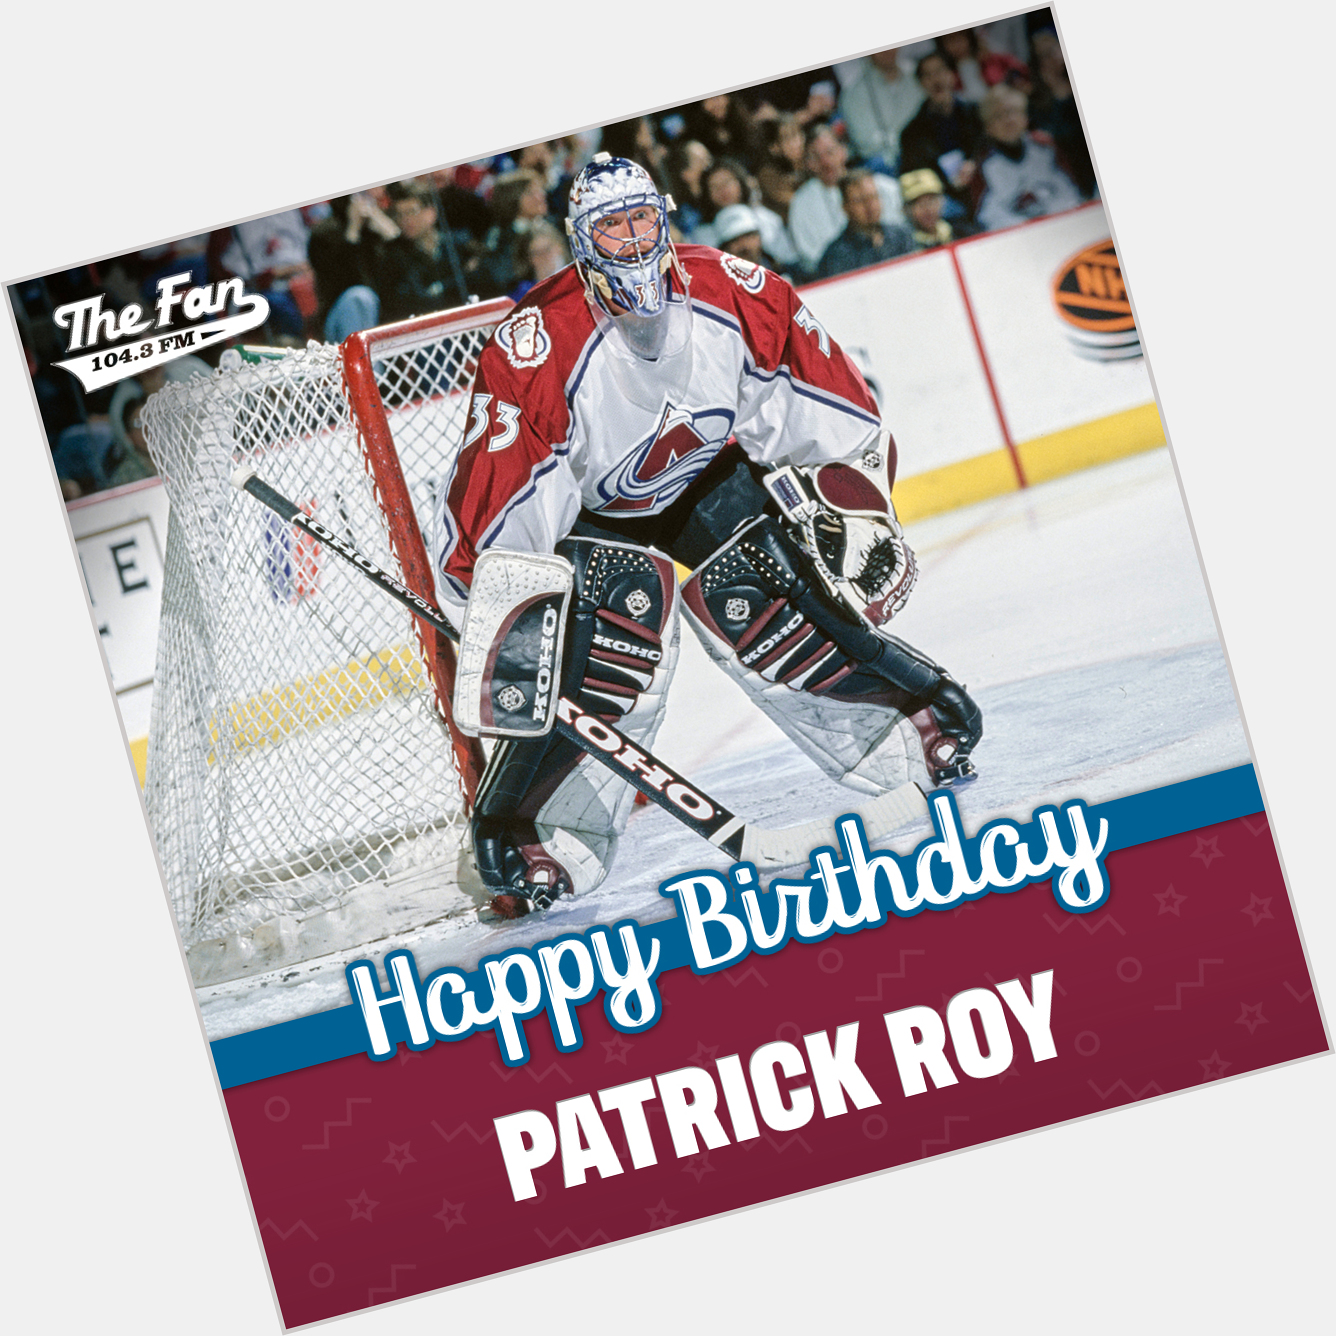 Wishing a happy birthday to a legend Hockey Hall of Famer and great Patrick Roy! 